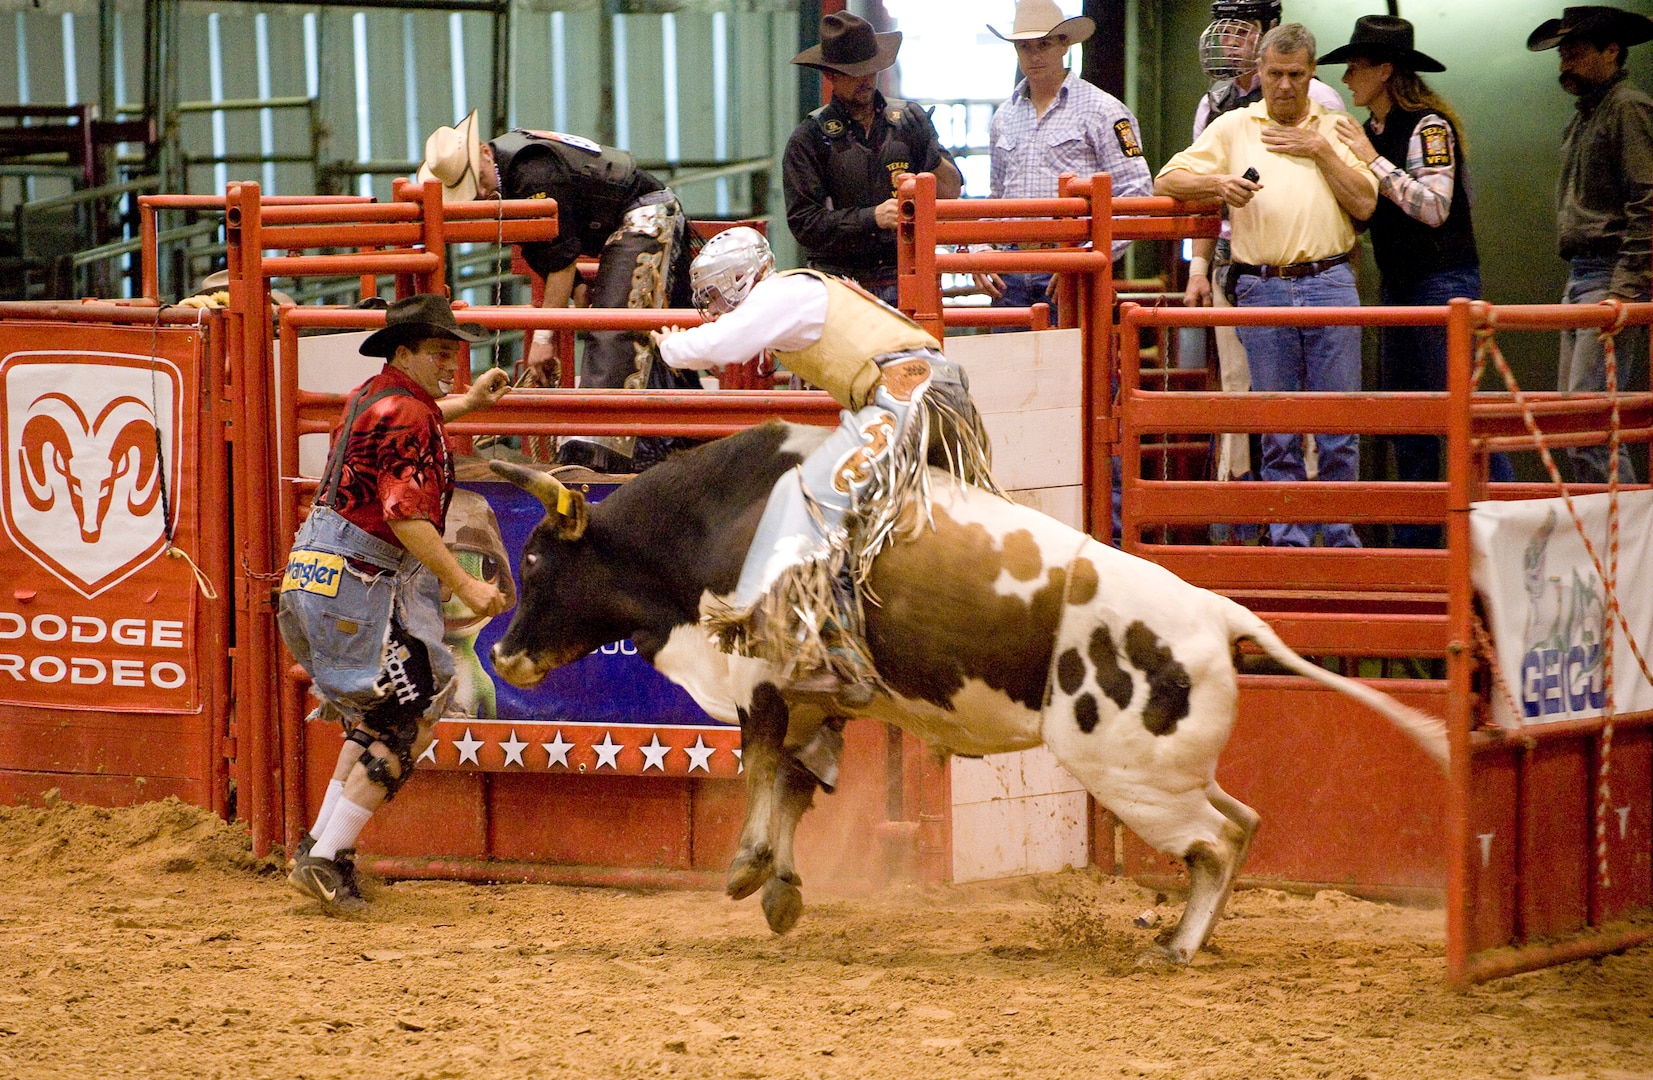 Airmen rope competition at rodeo world finals > Joint Base San Antonio >  News